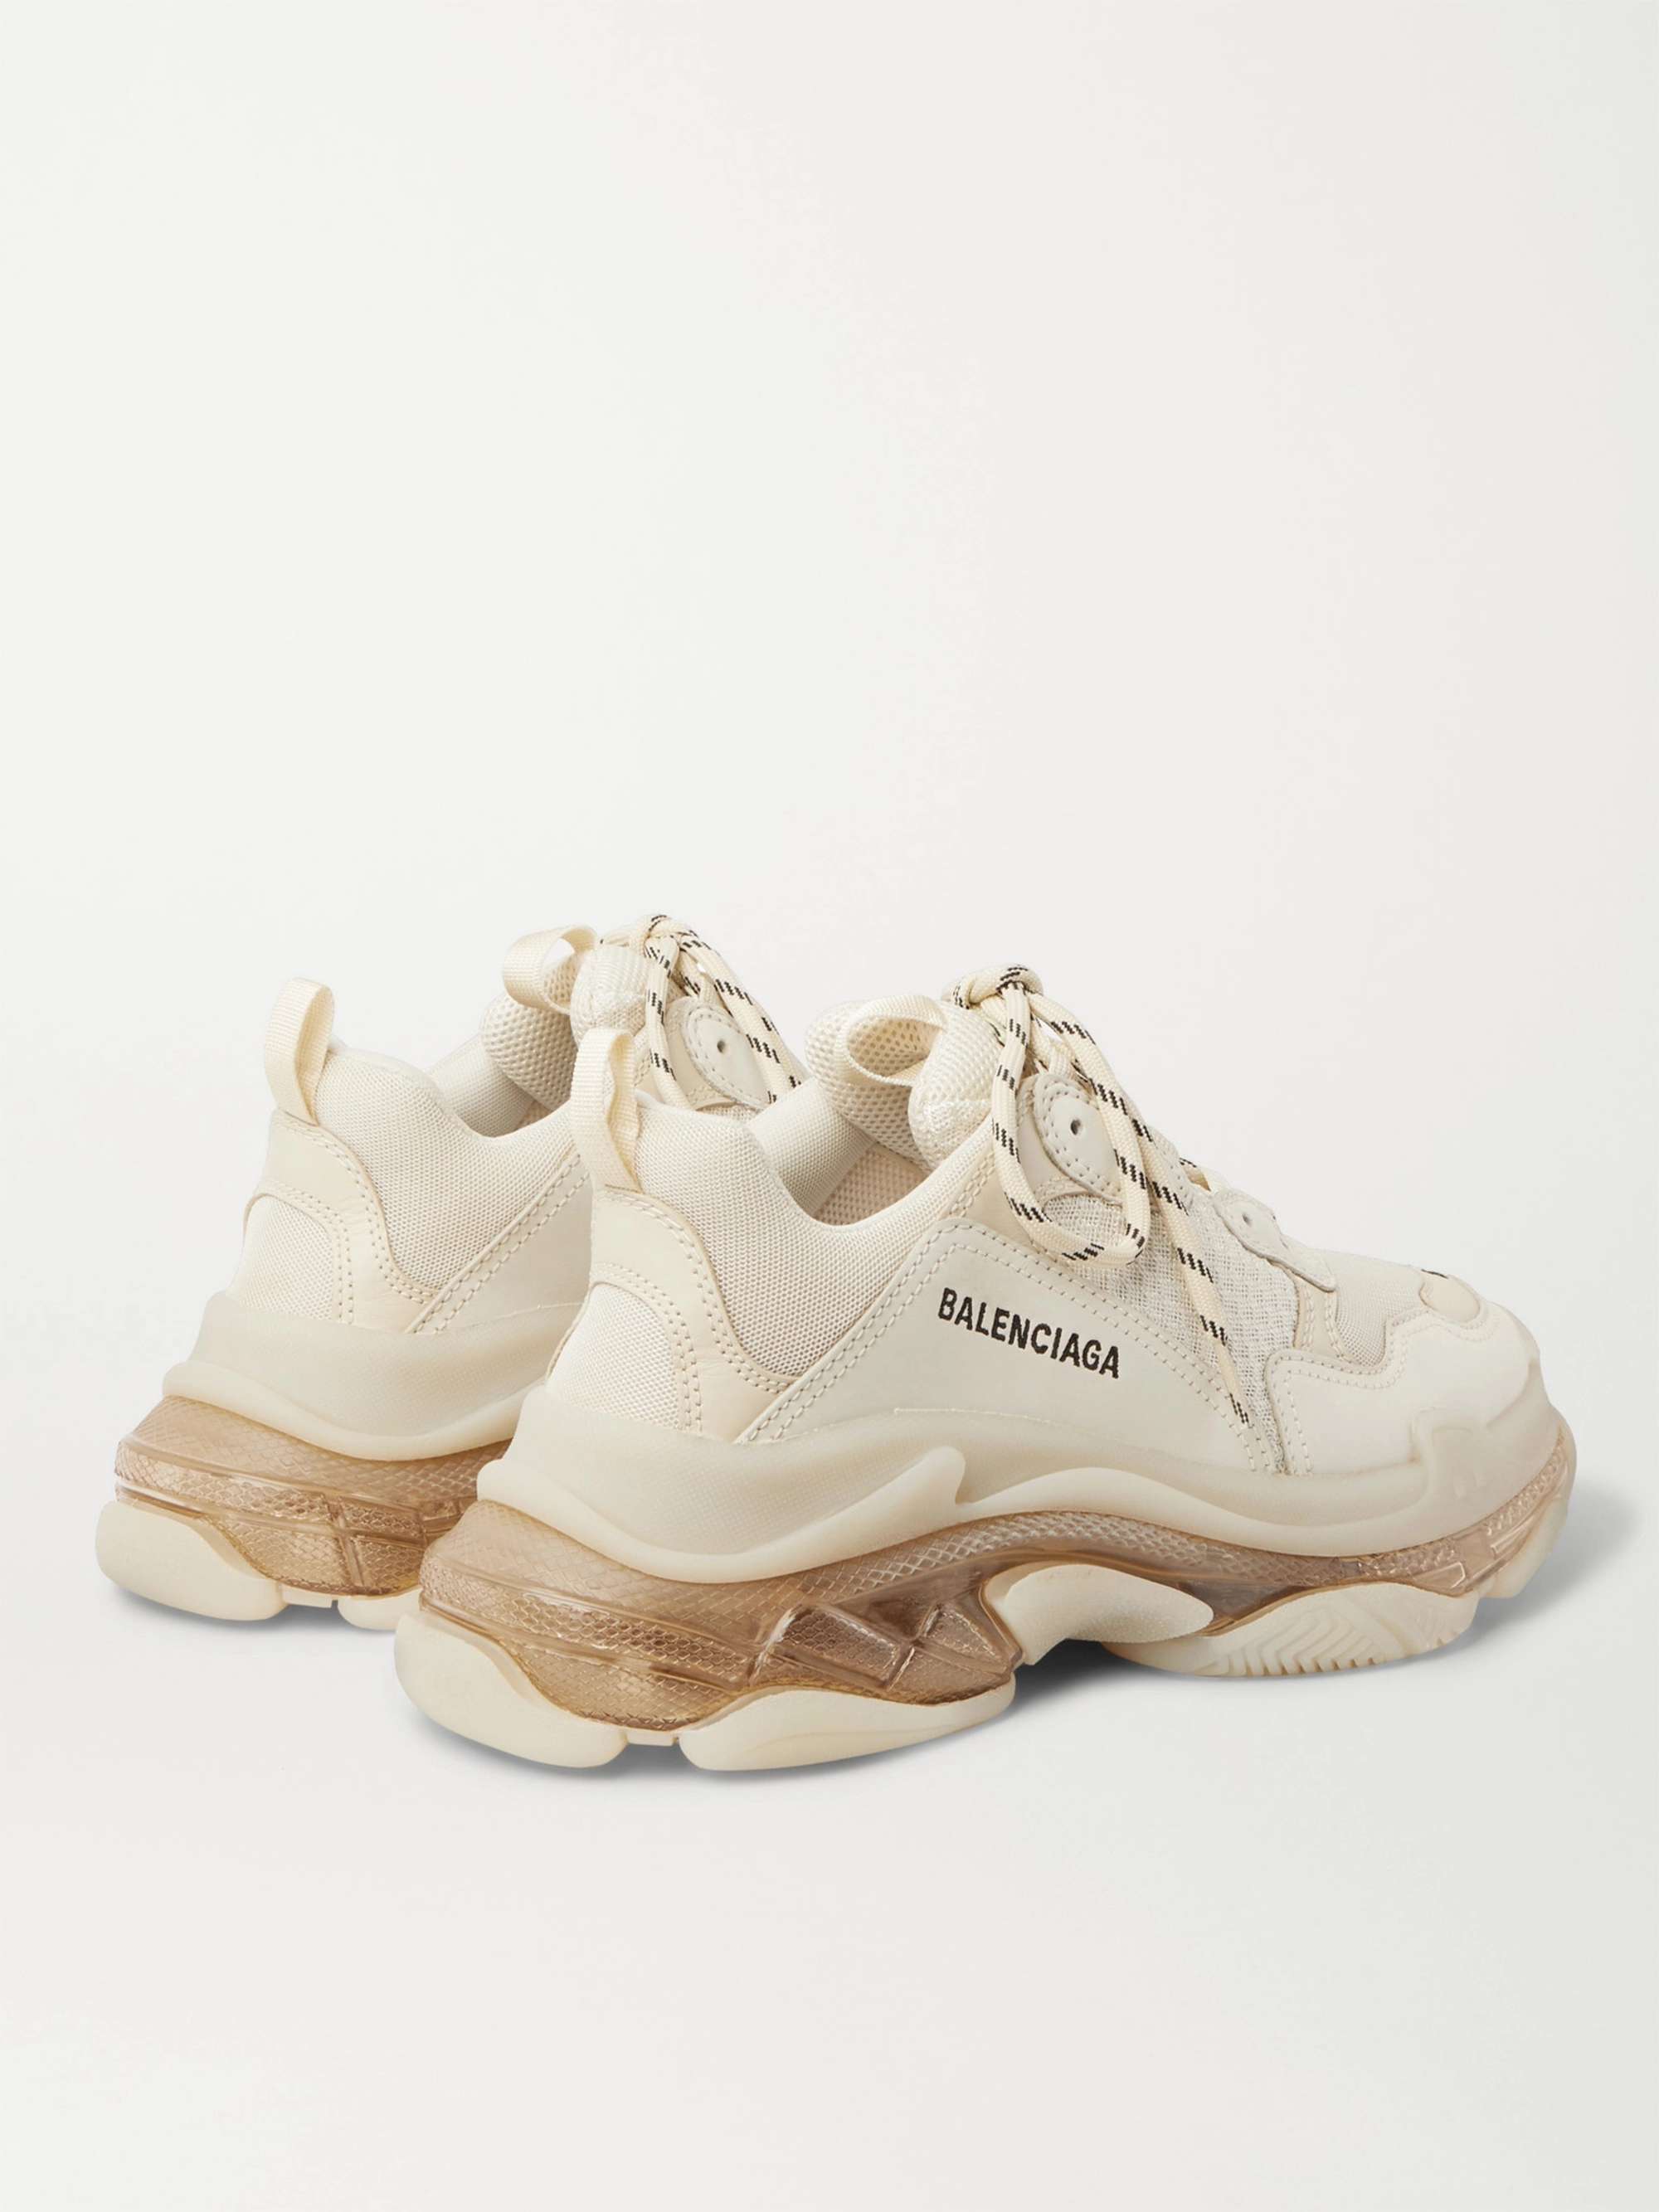 BALENCIAGA Triple S Clear Sole Mesh, Nubuck and Leather Sneakers